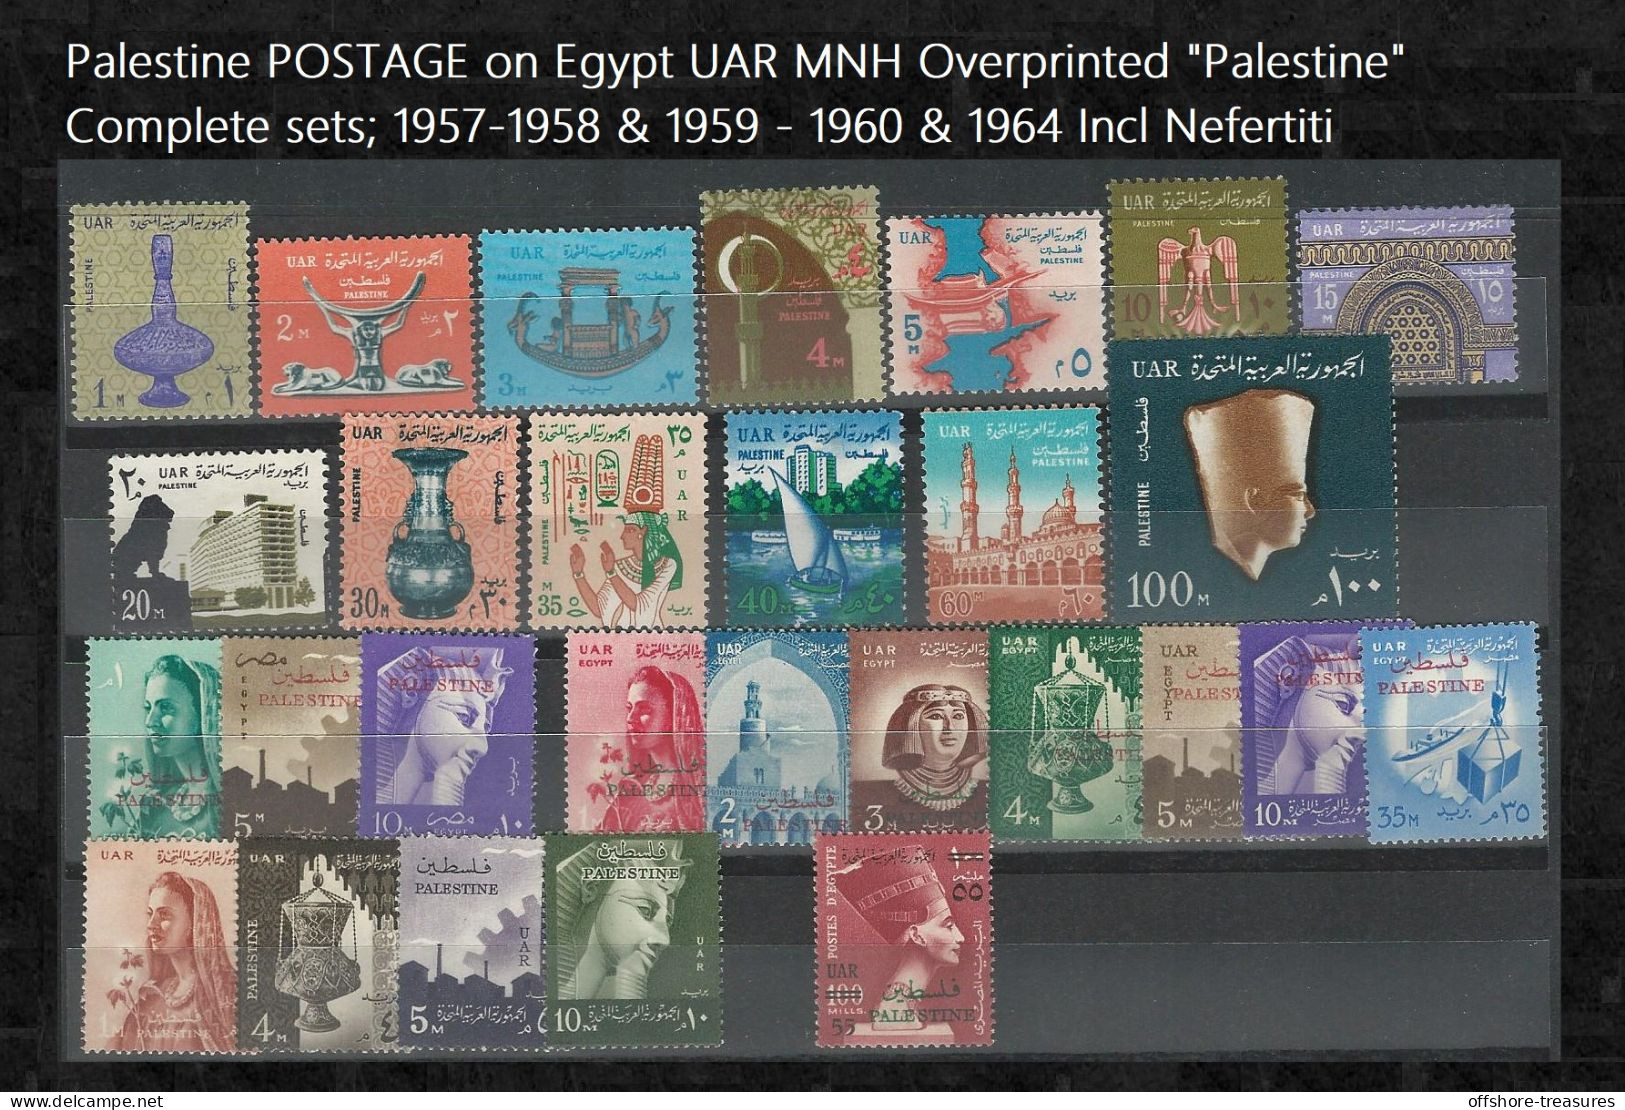 Palestine Postage Overprint On Egypt Stamps Full Sets; 1957, 1958, 1959, 1960 & 1964 Incl Nefertiti 55 Mill - ALL MNH - Unused Stamps